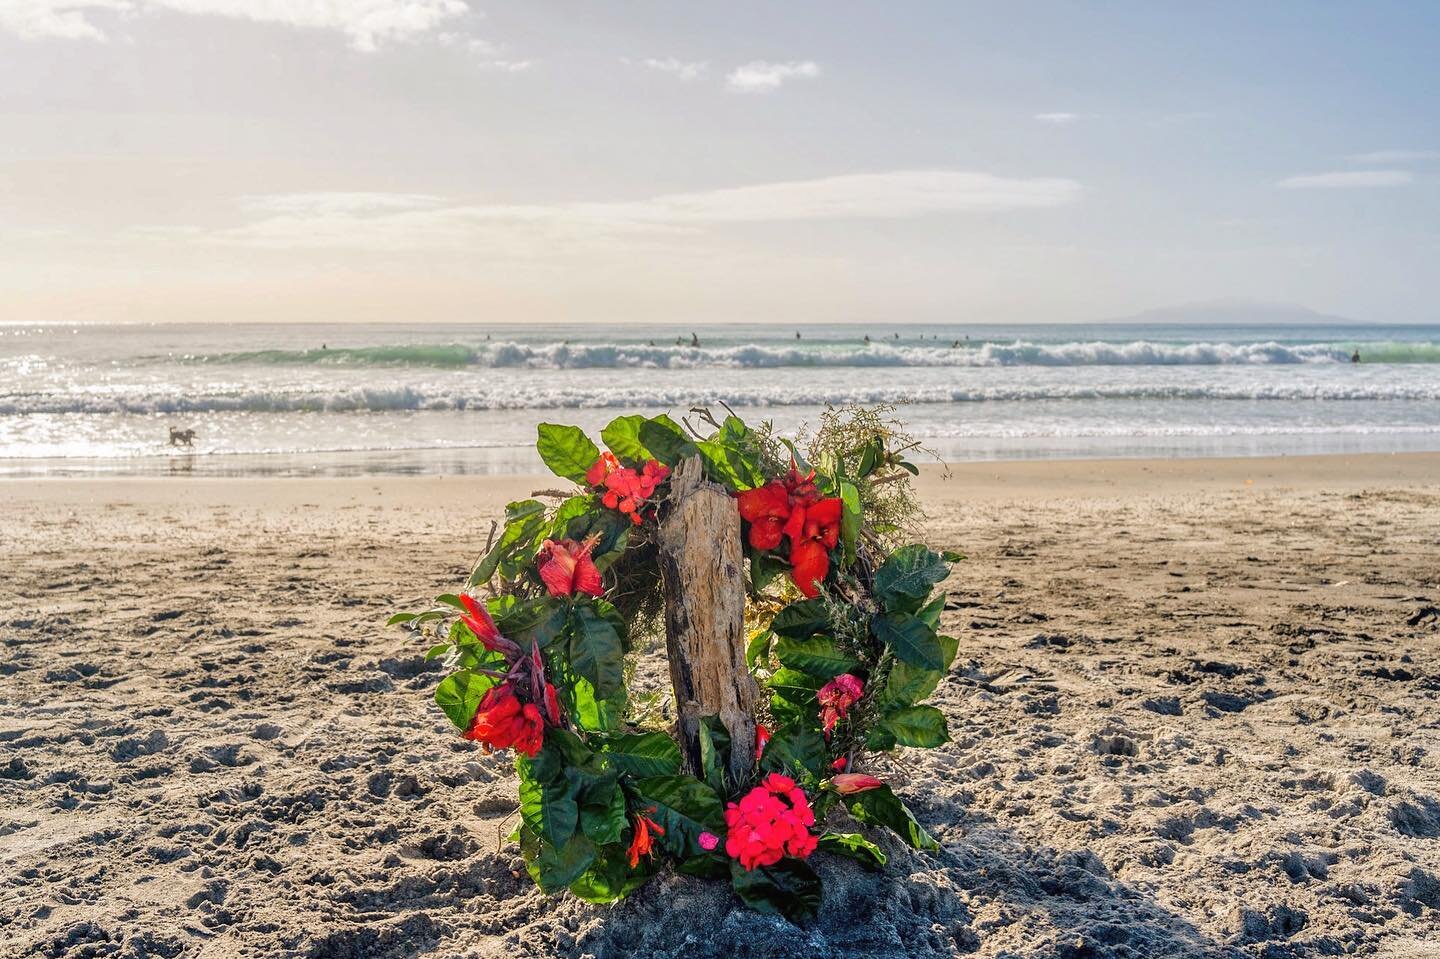 Least we forget 🌺

Today is Anzac Day in New Zealand, a day when the country stops to reflect &amp; remember all those who have passed &amp; returned from the landing at Gallipoli in 1915. 

Thousands of people will attend Anzac Day commemorations a